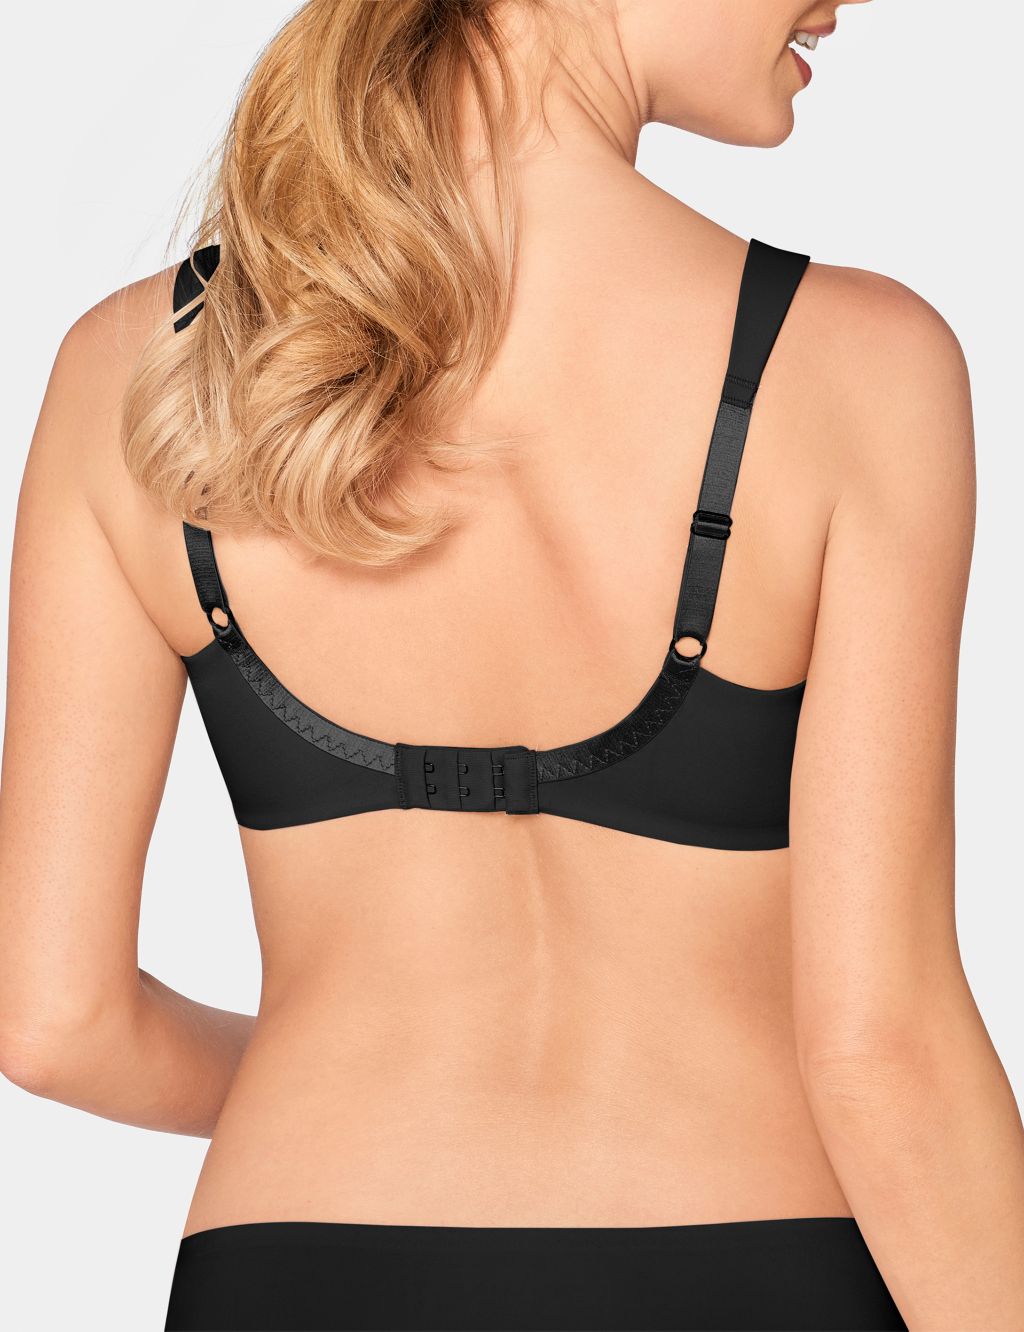 As a trans woman, finding the perfect bra can be tricky. Most bra  manufacturers design for narrower torsos and larger cups, leaving many